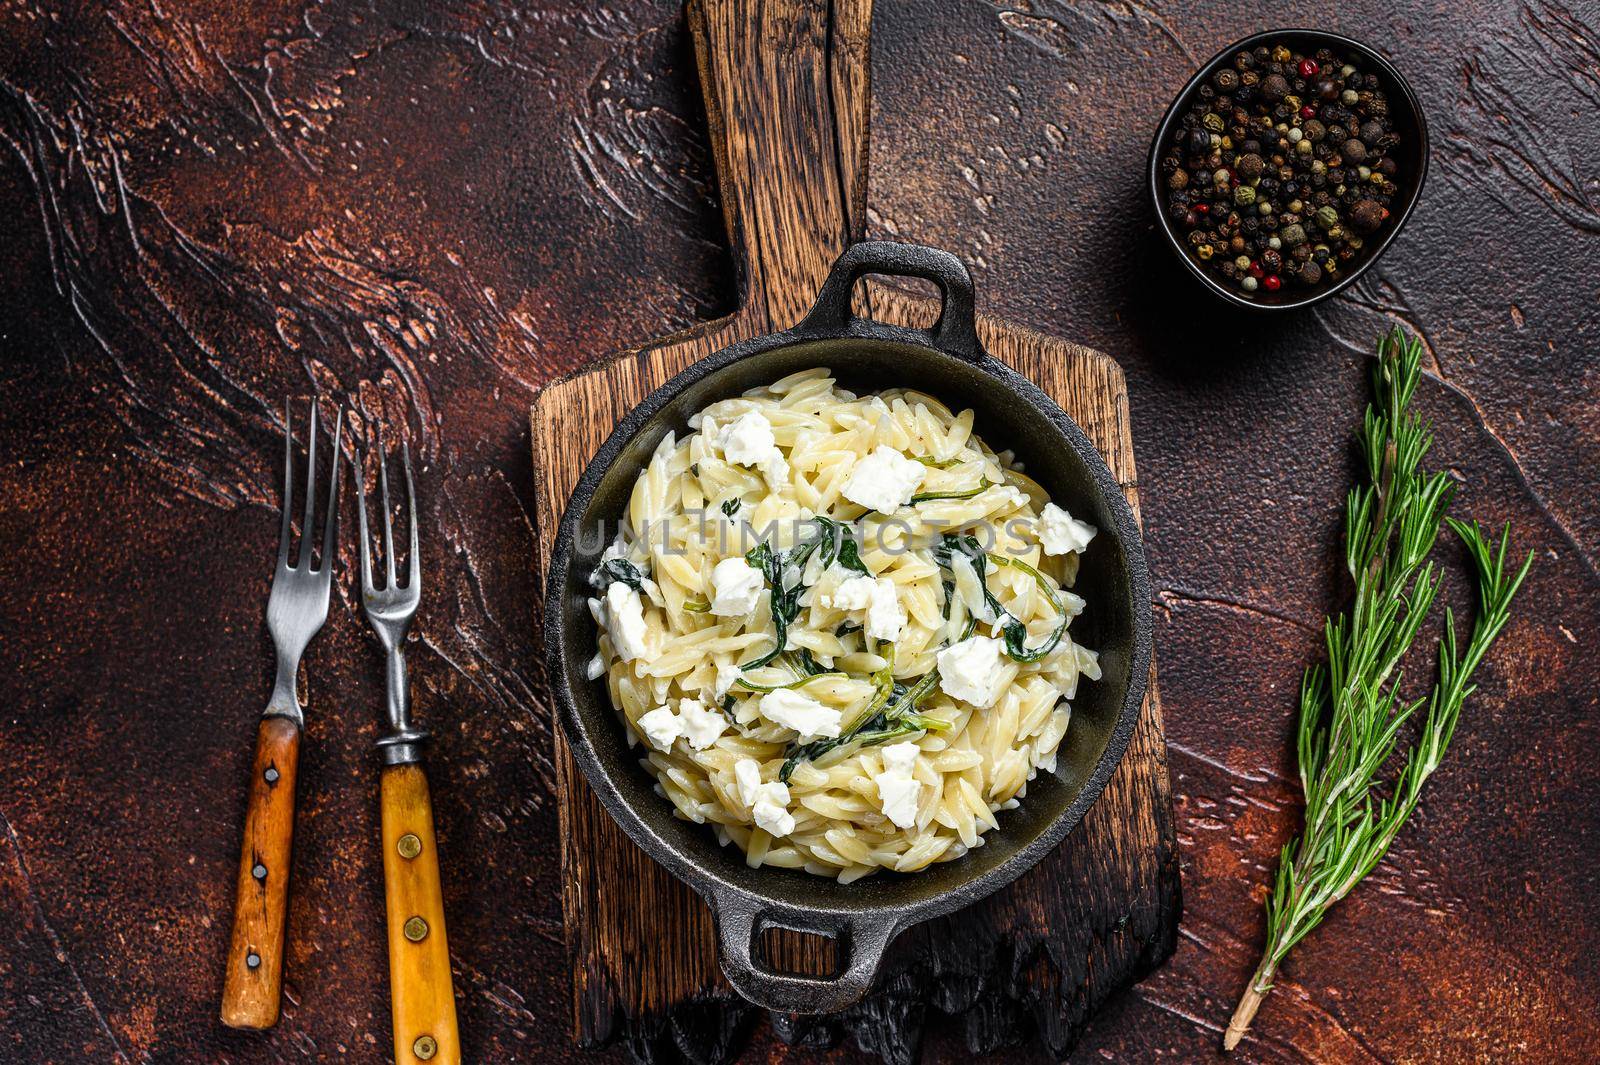 Orzo primavera with green veggies spinach. Dark wooden background. Top view by Composter